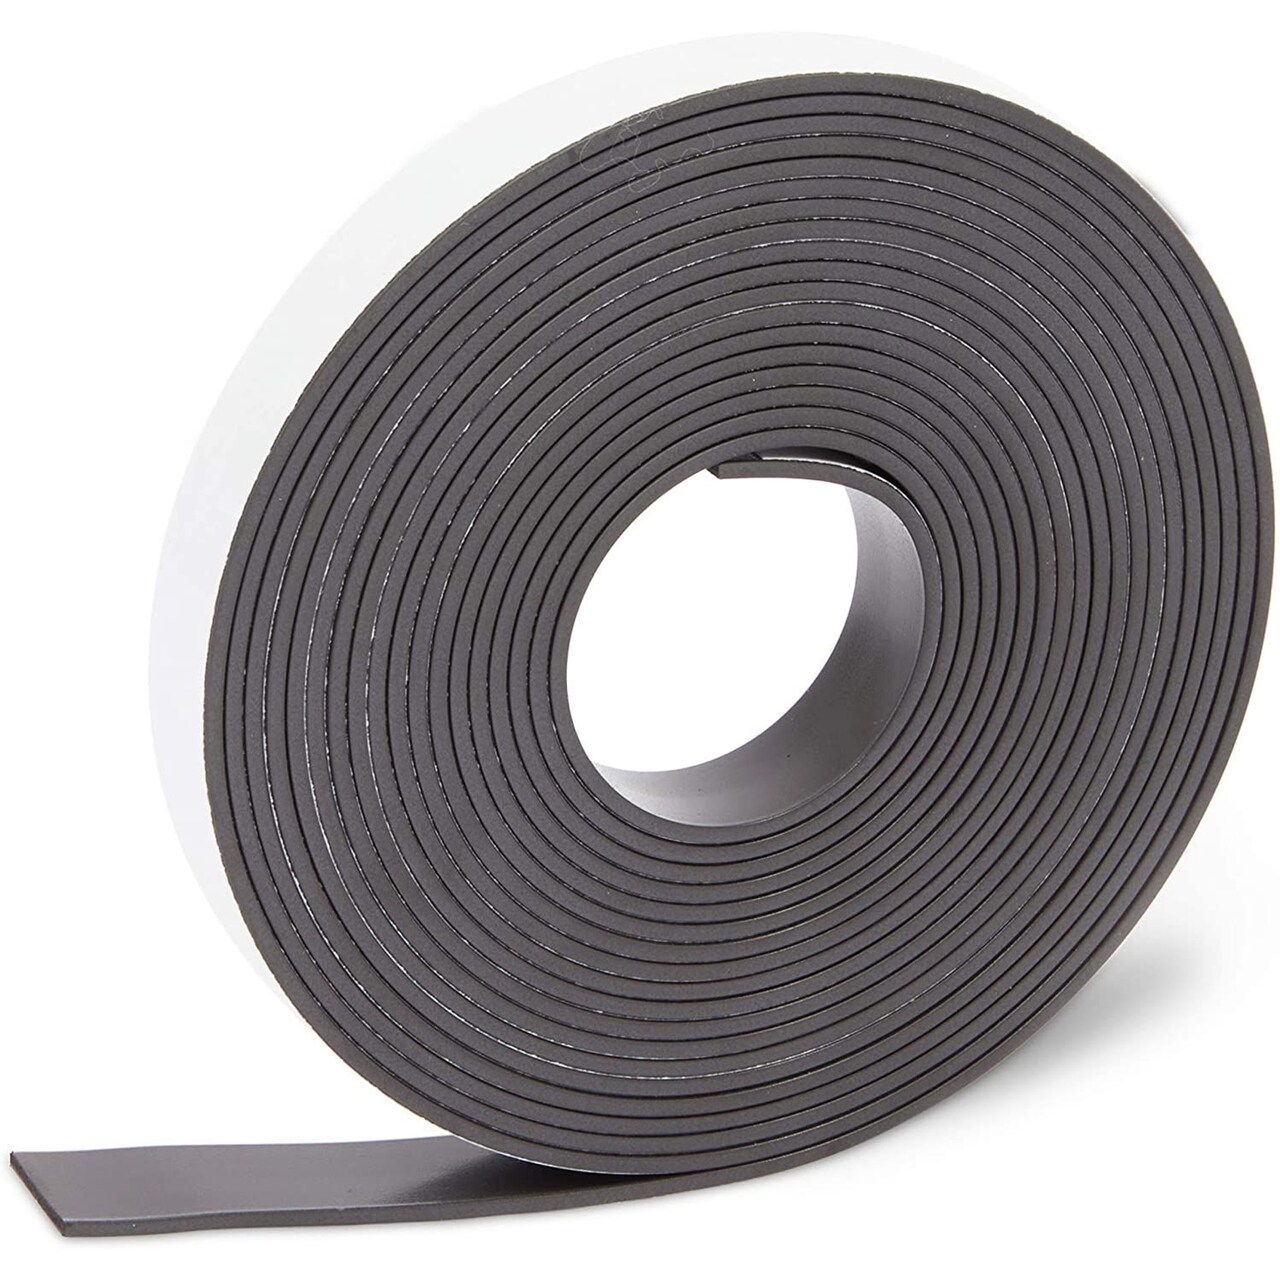 Magnetic Tape Roll with Adhesive Backing (0.5 Inch x 12 Feet, 1